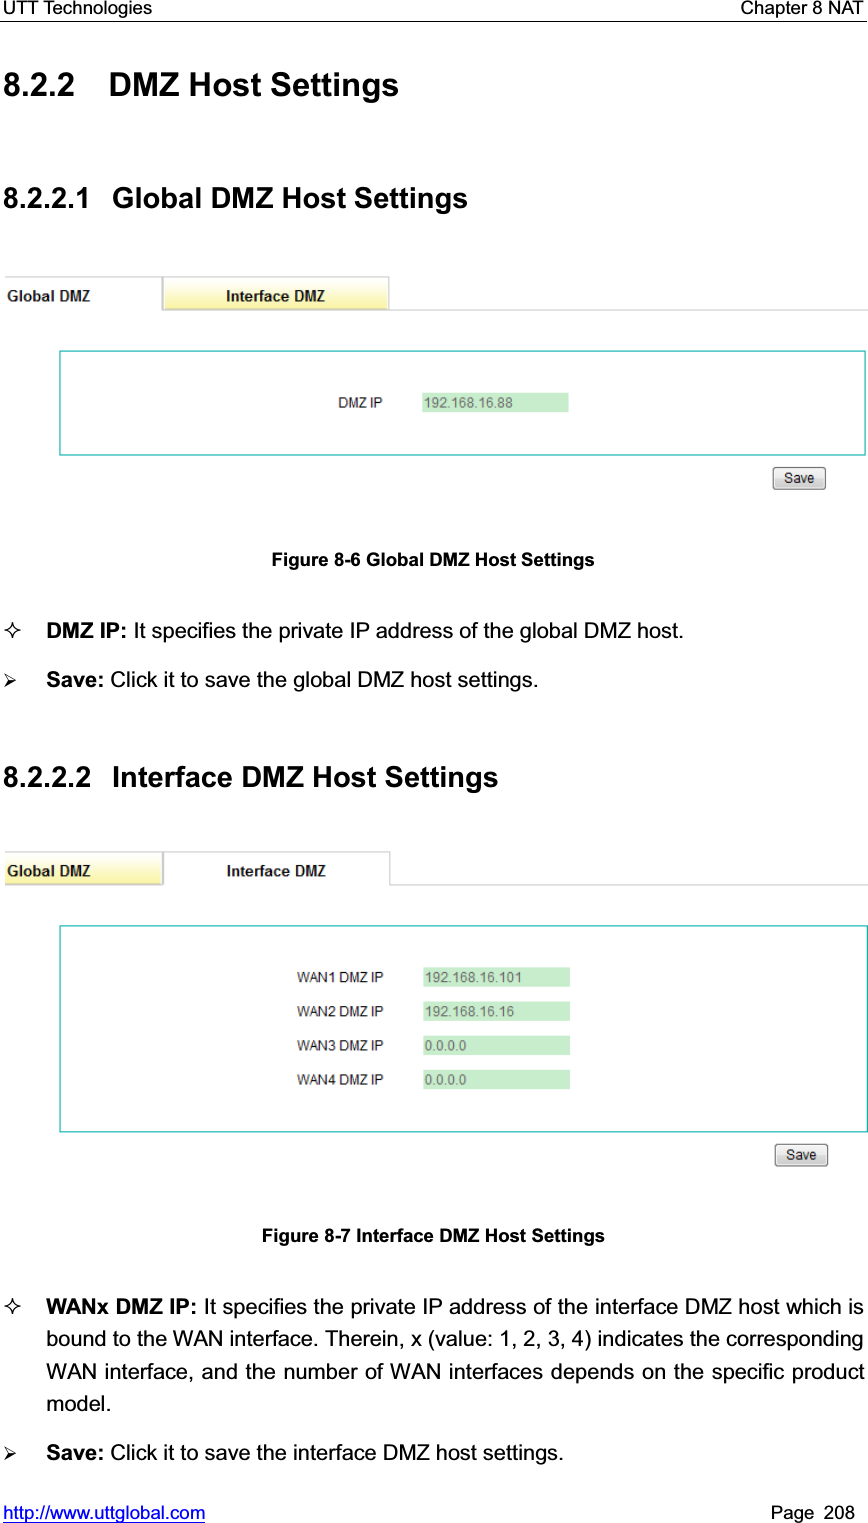 UTT Technologies    Chapter 8 NAT   http://www.uttglobal.com Page 208 8.2.2 DMZ Host Settings 8.2.2.1 Global DMZ Host Settings Figure 8-6 Global DMZ Host Settings DMZ IP: It specifies the private IP address of the global DMZ host. ¾Save: Click it to save the global DMZ host settings.8.2.2.2  Interface DMZ Host Settings Figure 8-7 Interface DMZ Host Settings WANx DMZ IP: It specifies the private IP address of the interface DMZ host which is bound to the WAN interface. Therein, x (value: 1, 2, 3, 4) indicates the corresponding WAN interface, and the number of WAN interfaces depends on the specific product model. ¾Save: Click it to save the interface DMZ host settings.